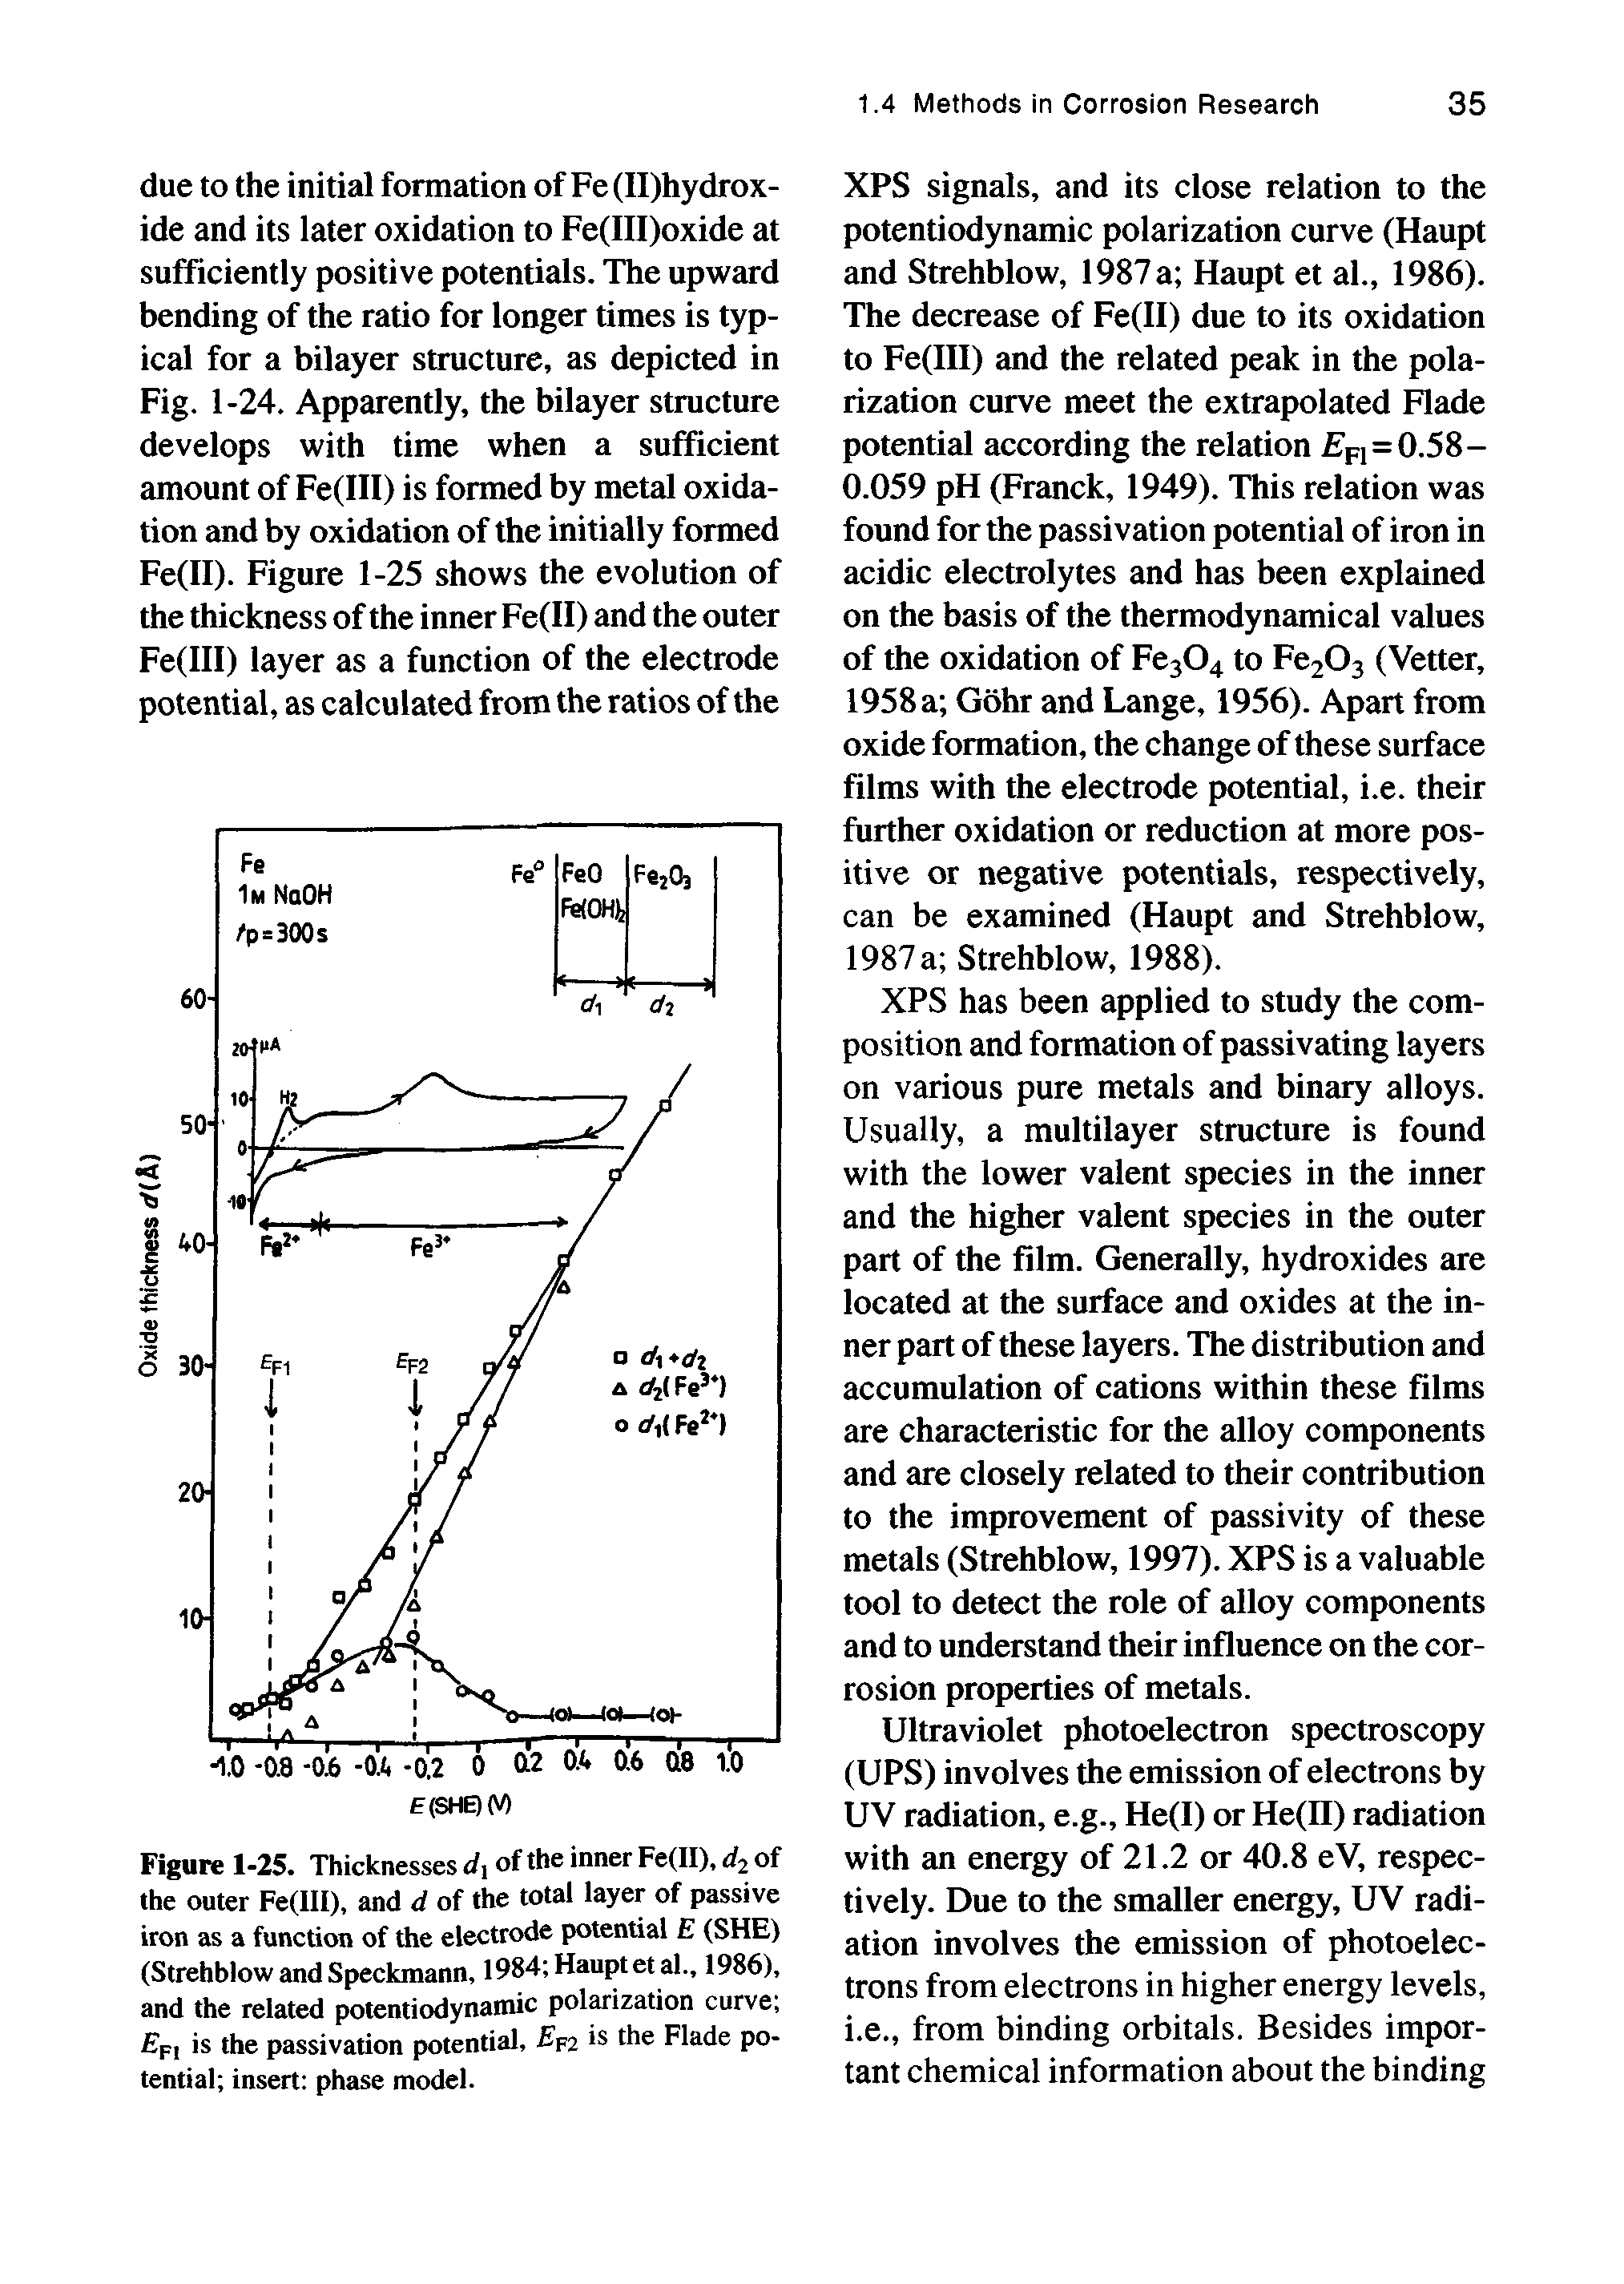 Figure 1-25. Thicknesses of the inner Fe(II), of the outer Fe(III), and d of the total layer of passive iron as a function of the electrode potential E (SHE) (StrehblowandSpeckmann, l984 Hanptetal., 1986). and the related potentiodynanuc polarization curve pi is the passivation potential, f2 the Flade potential insert phase model.